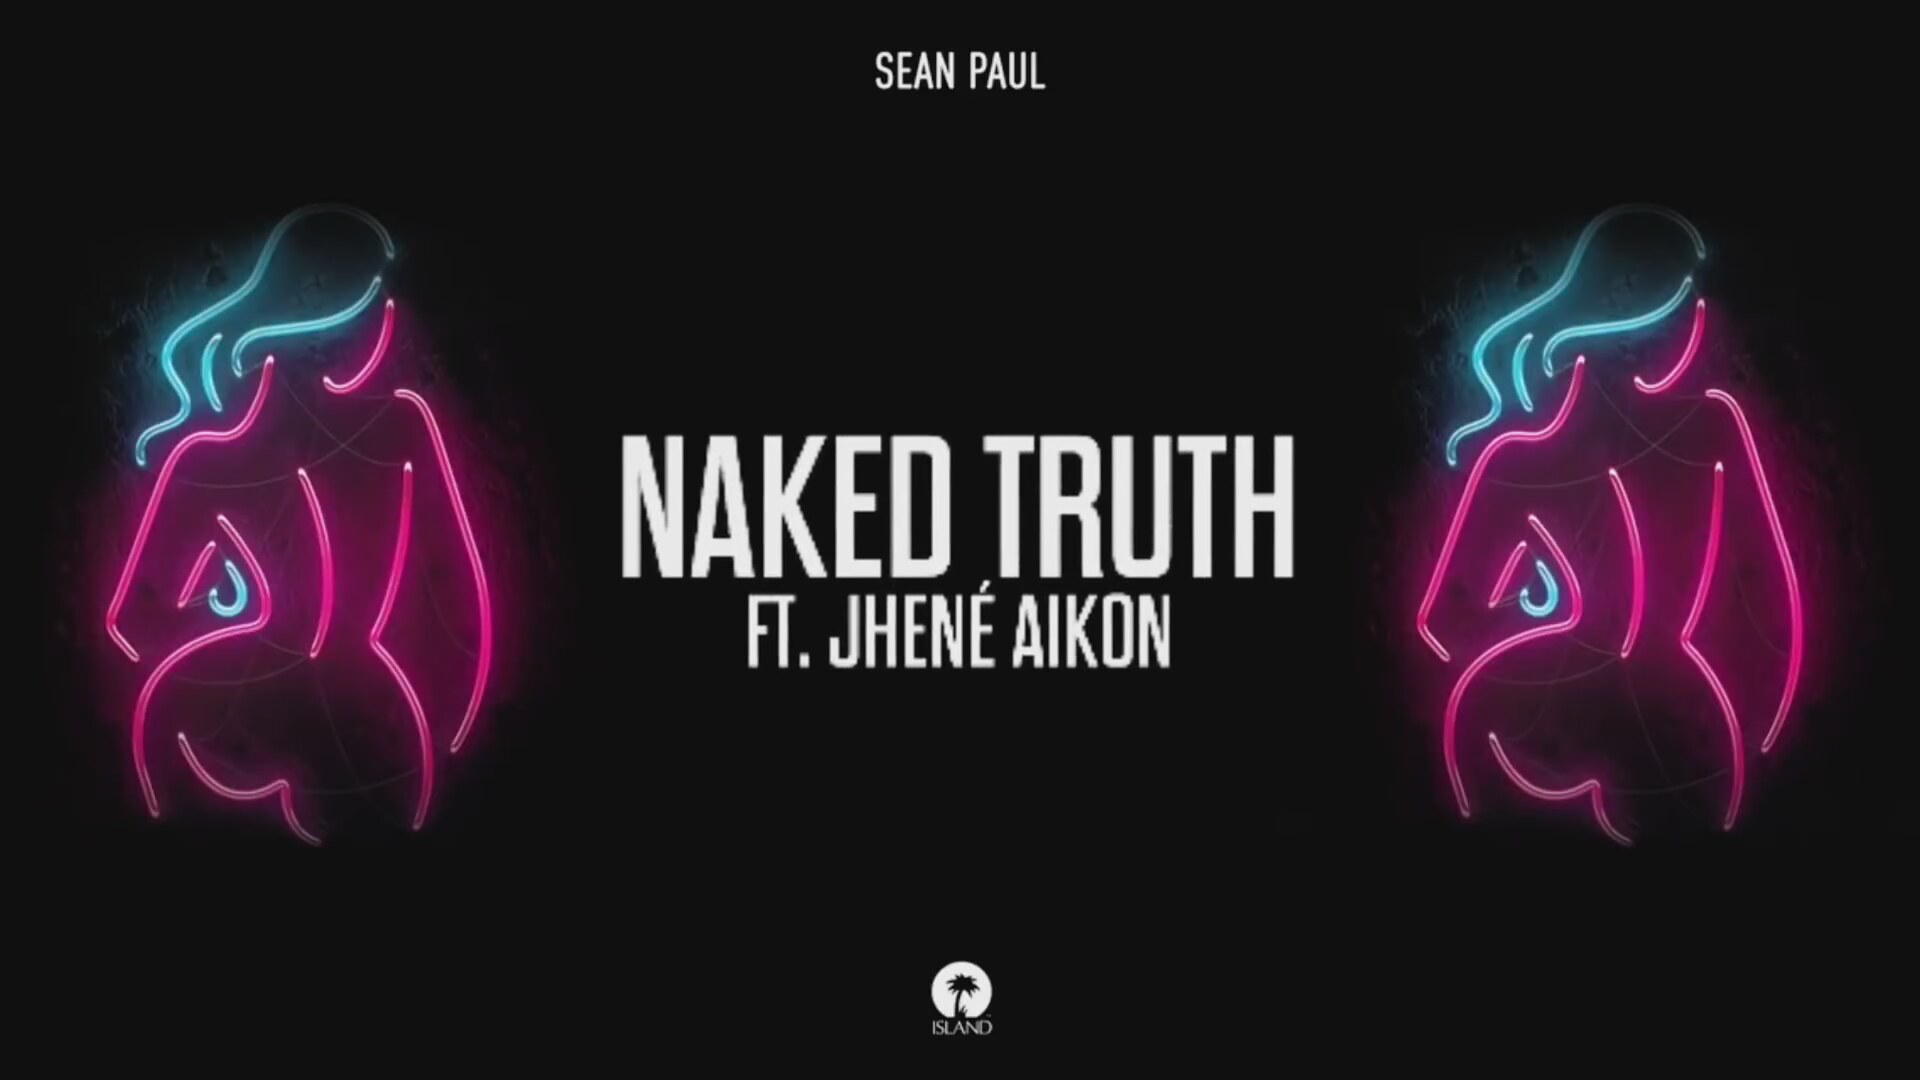 Sean Paul - Naked Truth Feat. 